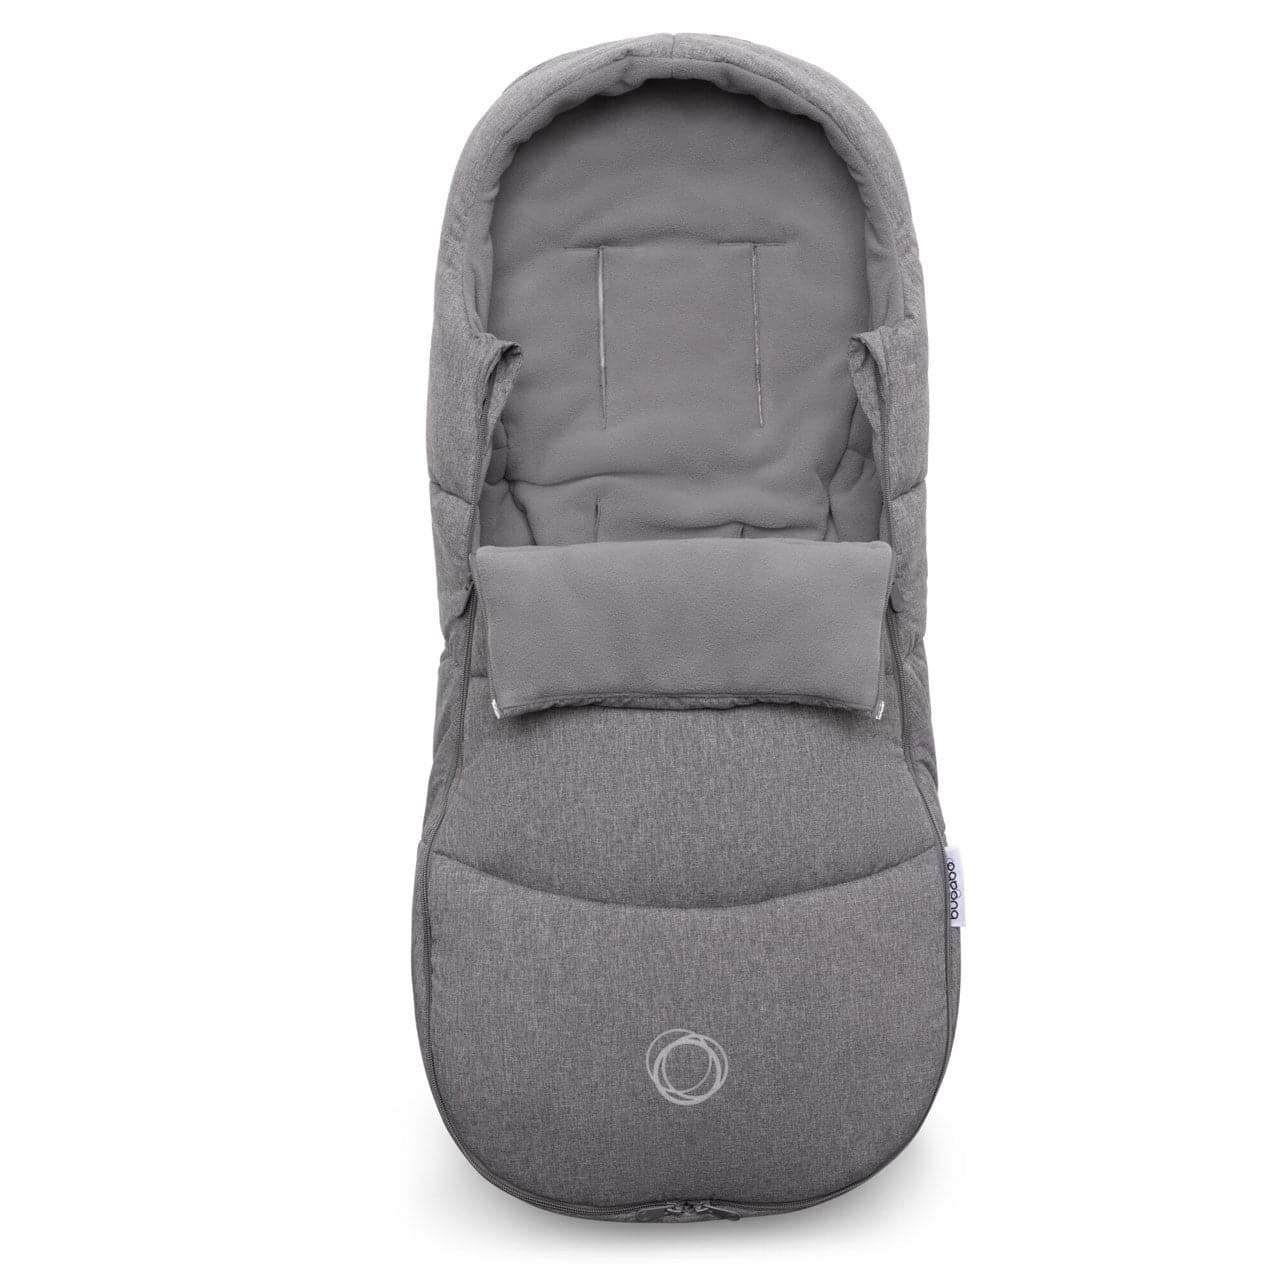 Bugaboo Footmuff - Grey Melange - For Your Little One